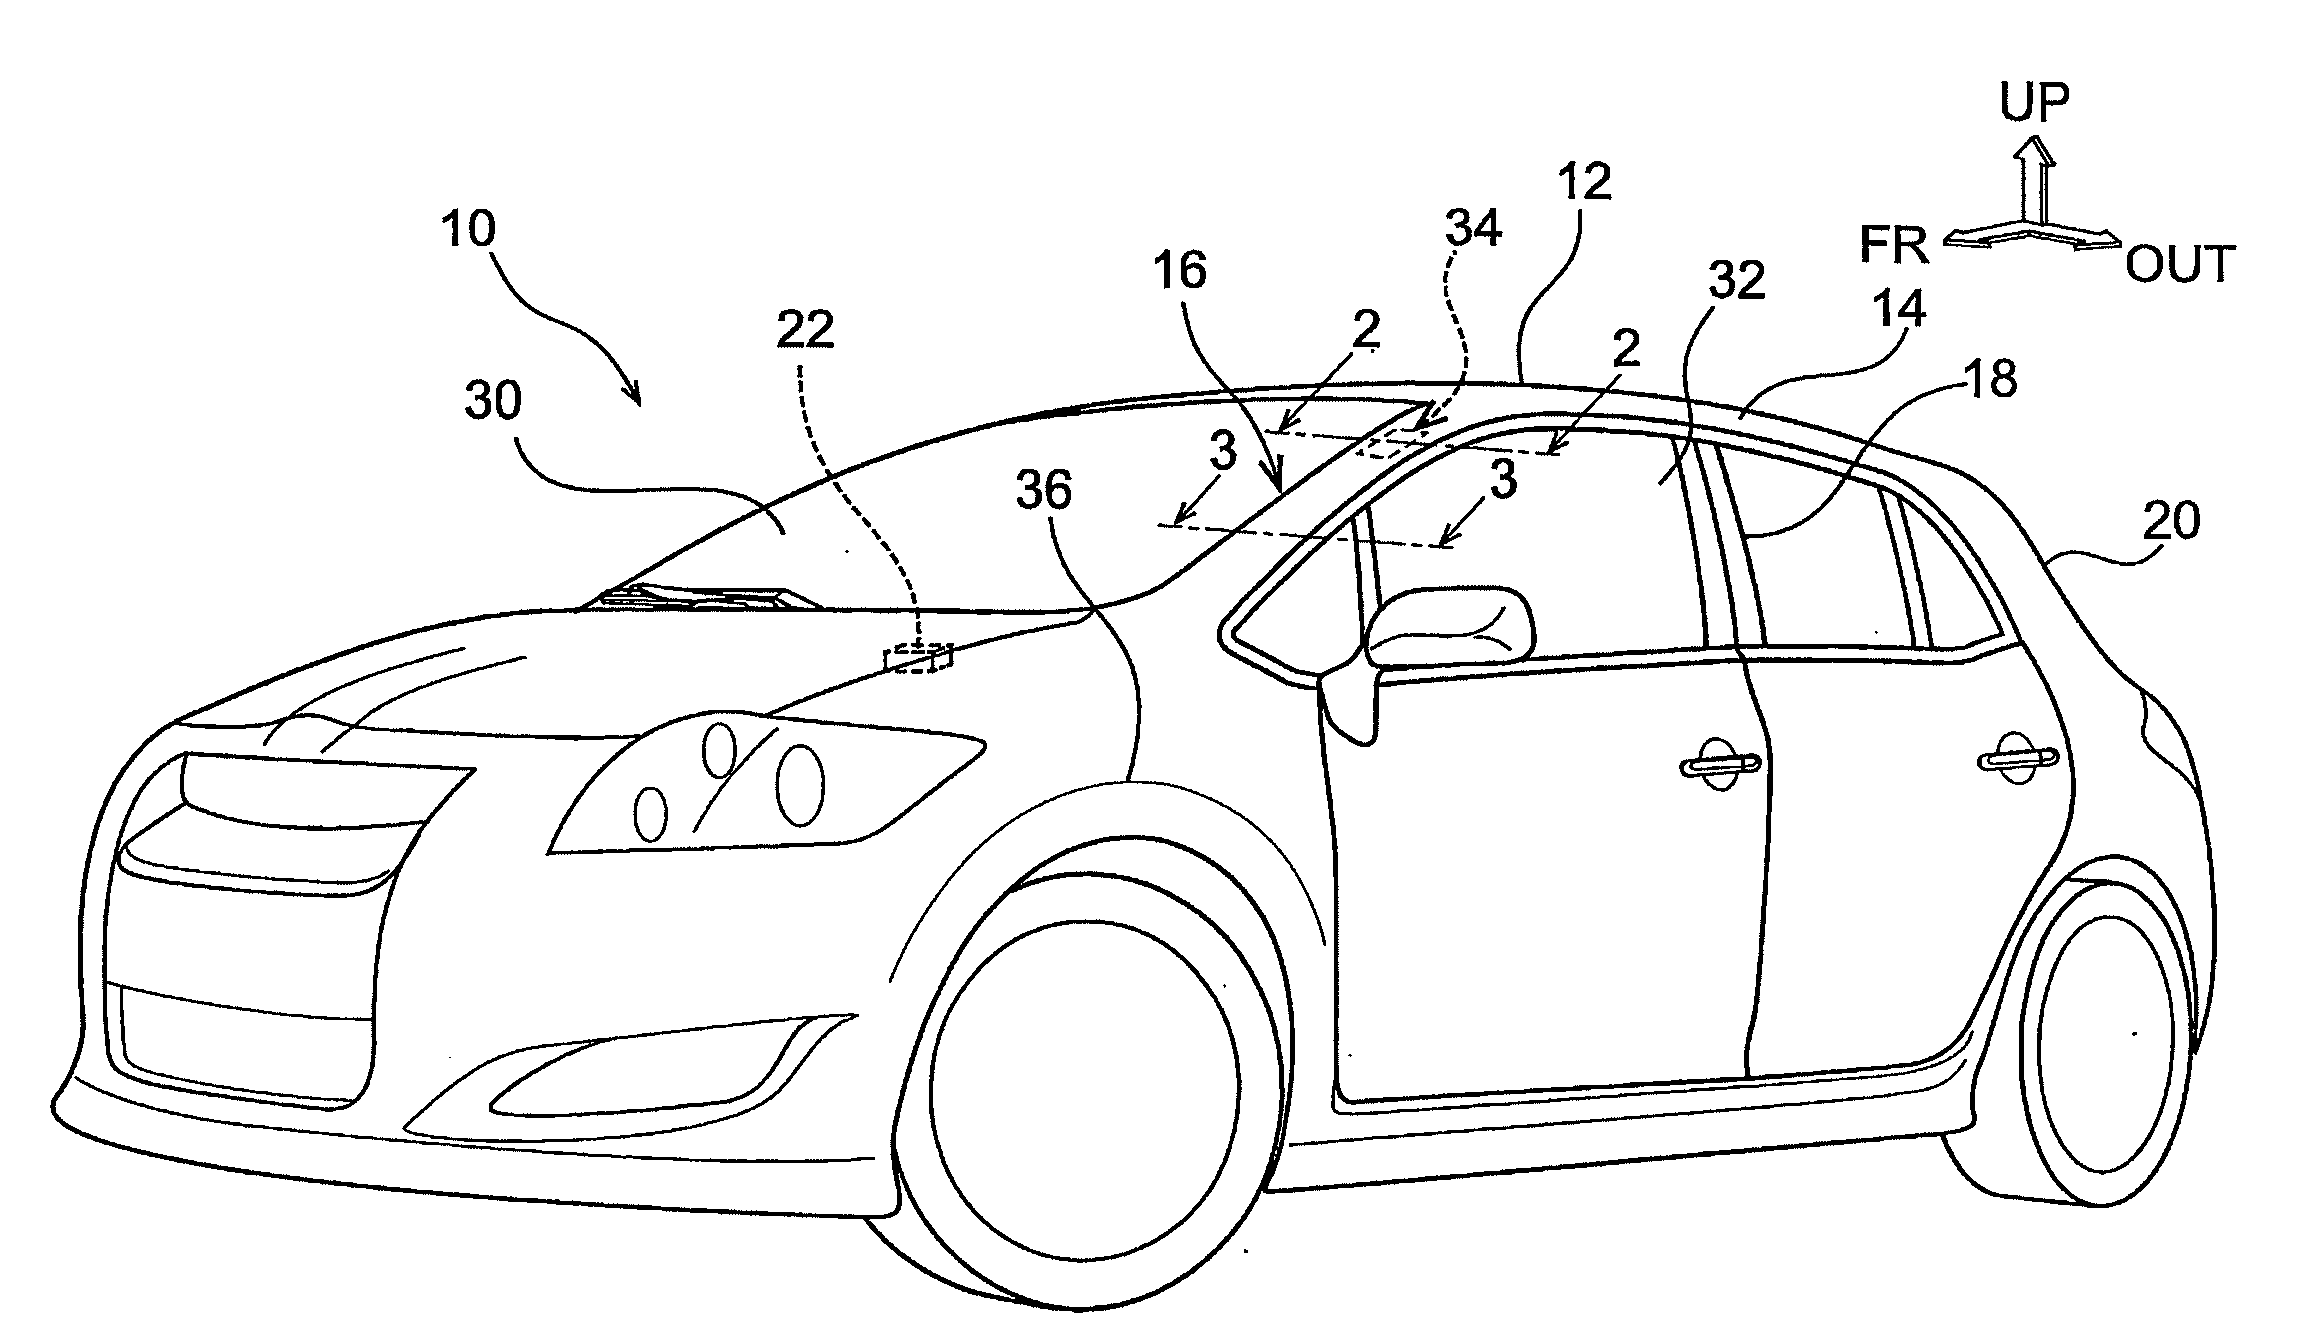 Placement structure for peripheral information detecting sensor, and self-driving vehicle